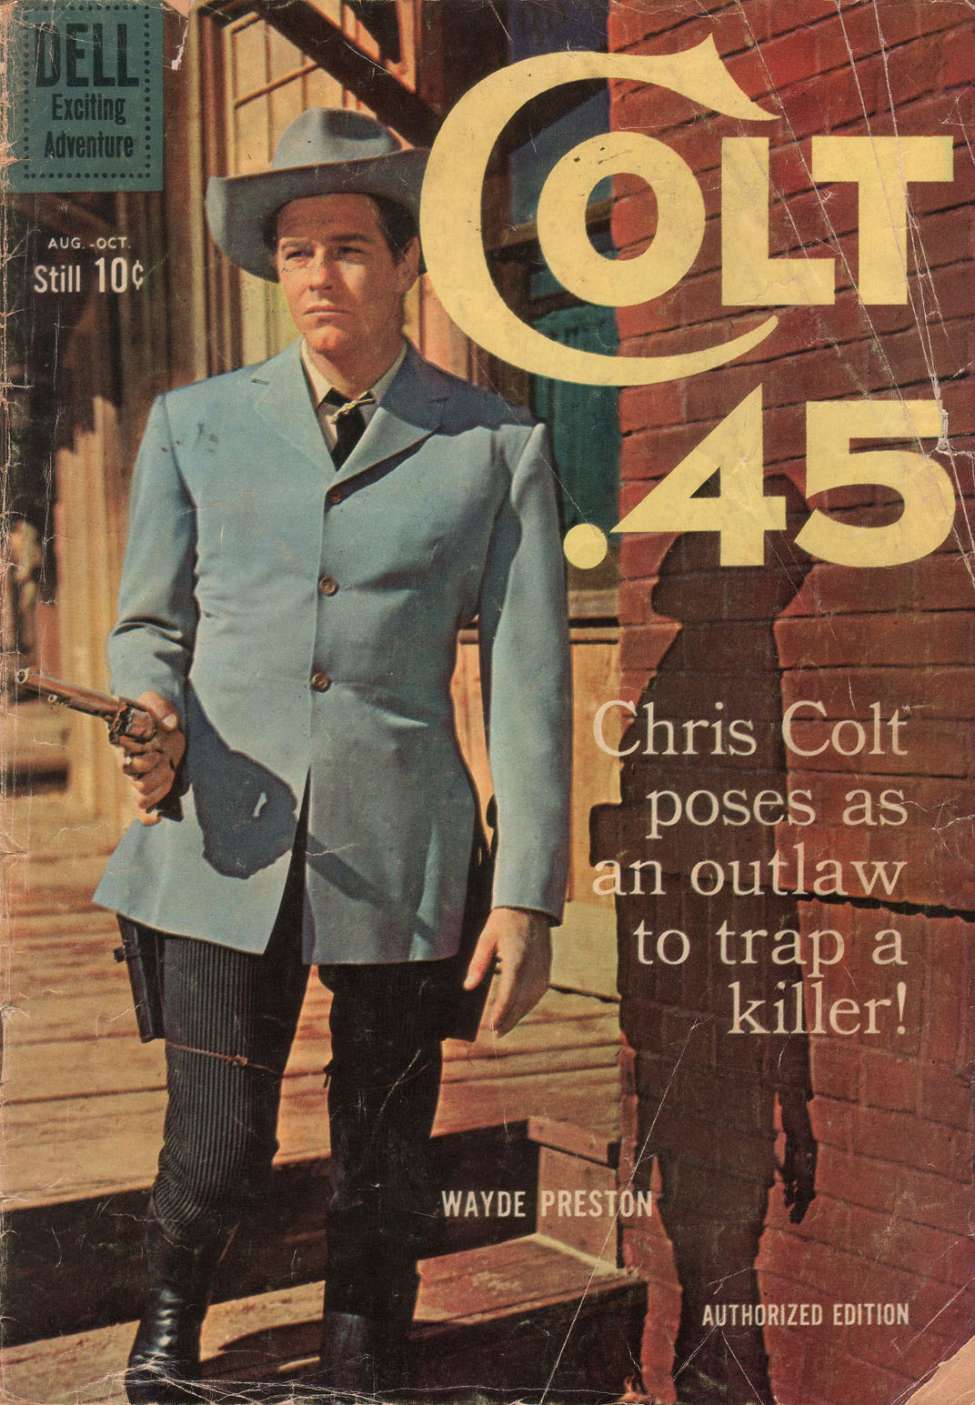 Book Cover For Colt .45 6